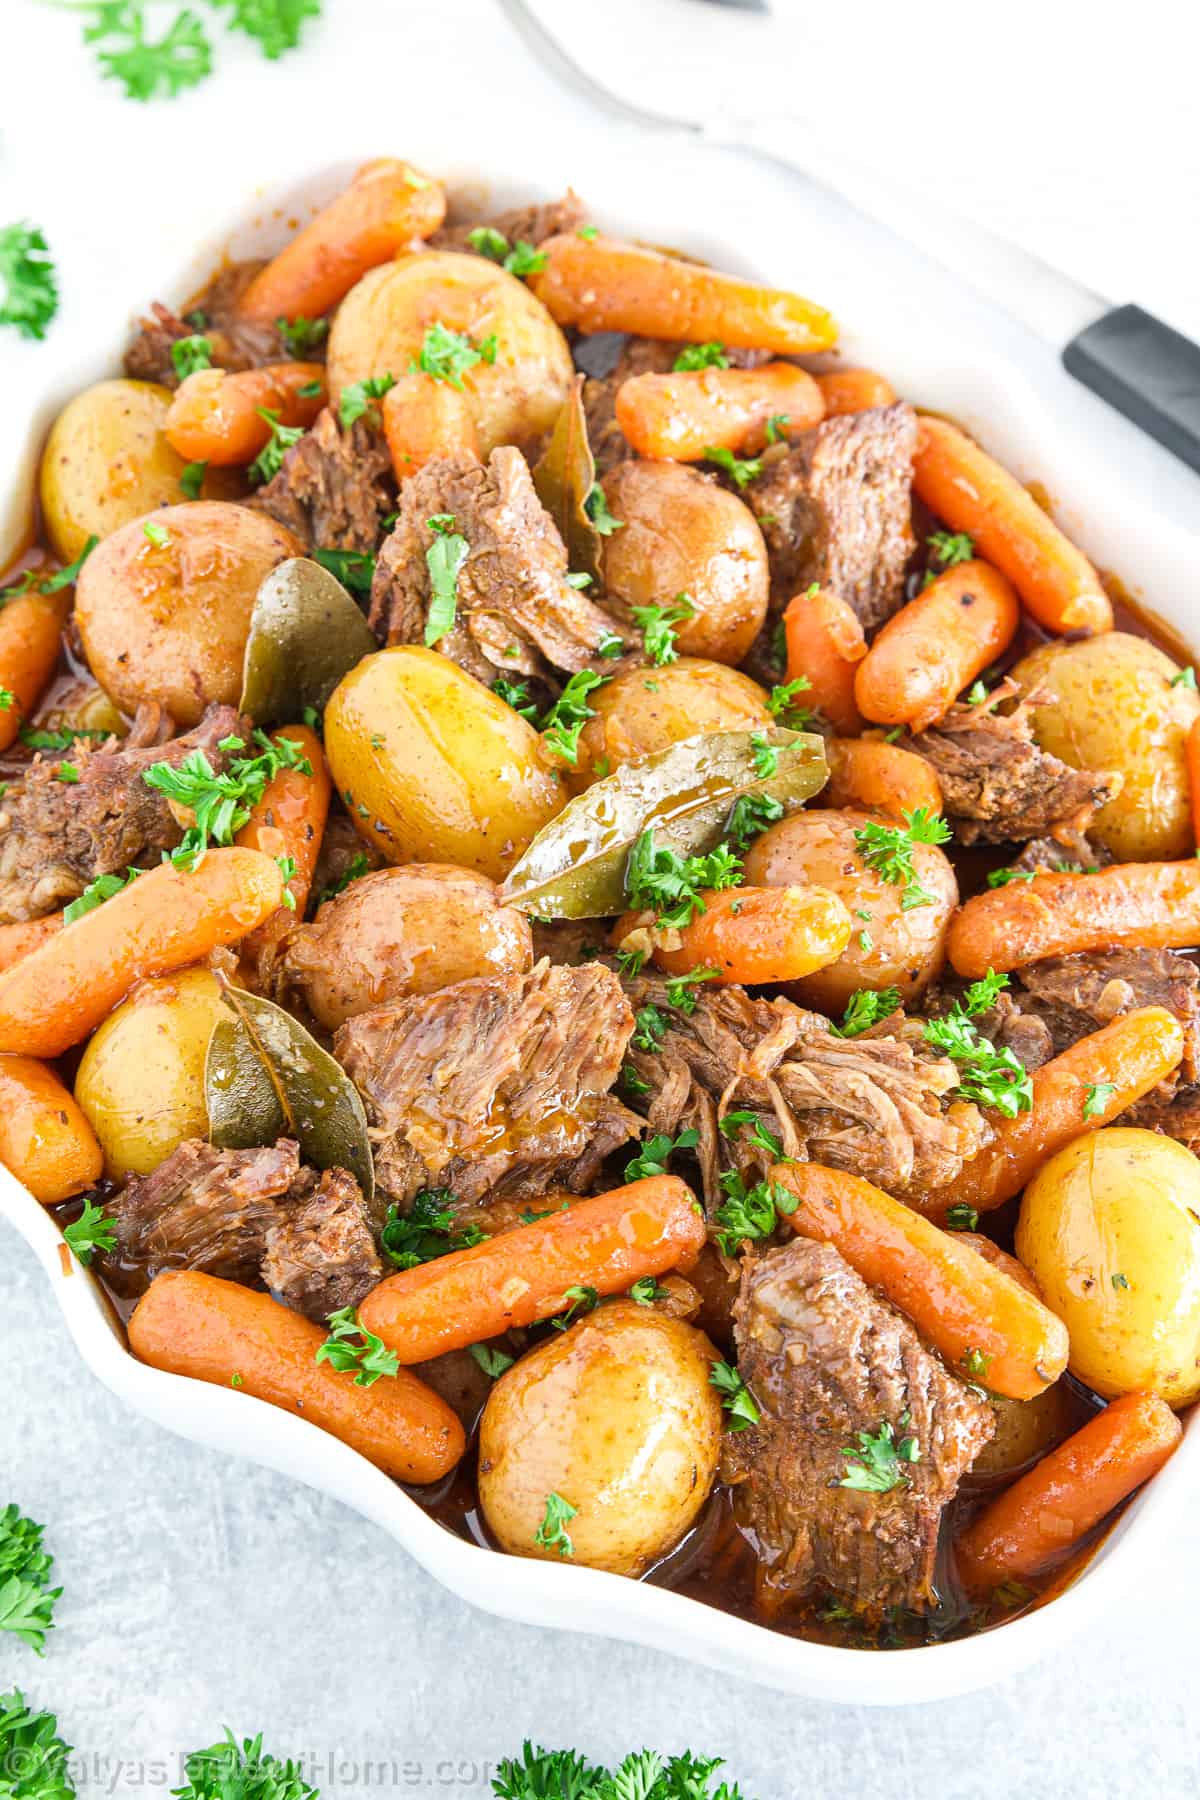 This Instant Pot chuck roast recipe is incredibly easy to prepare. With the Instant Pot doing most of the work, you can have a delicious meal ready in no time.